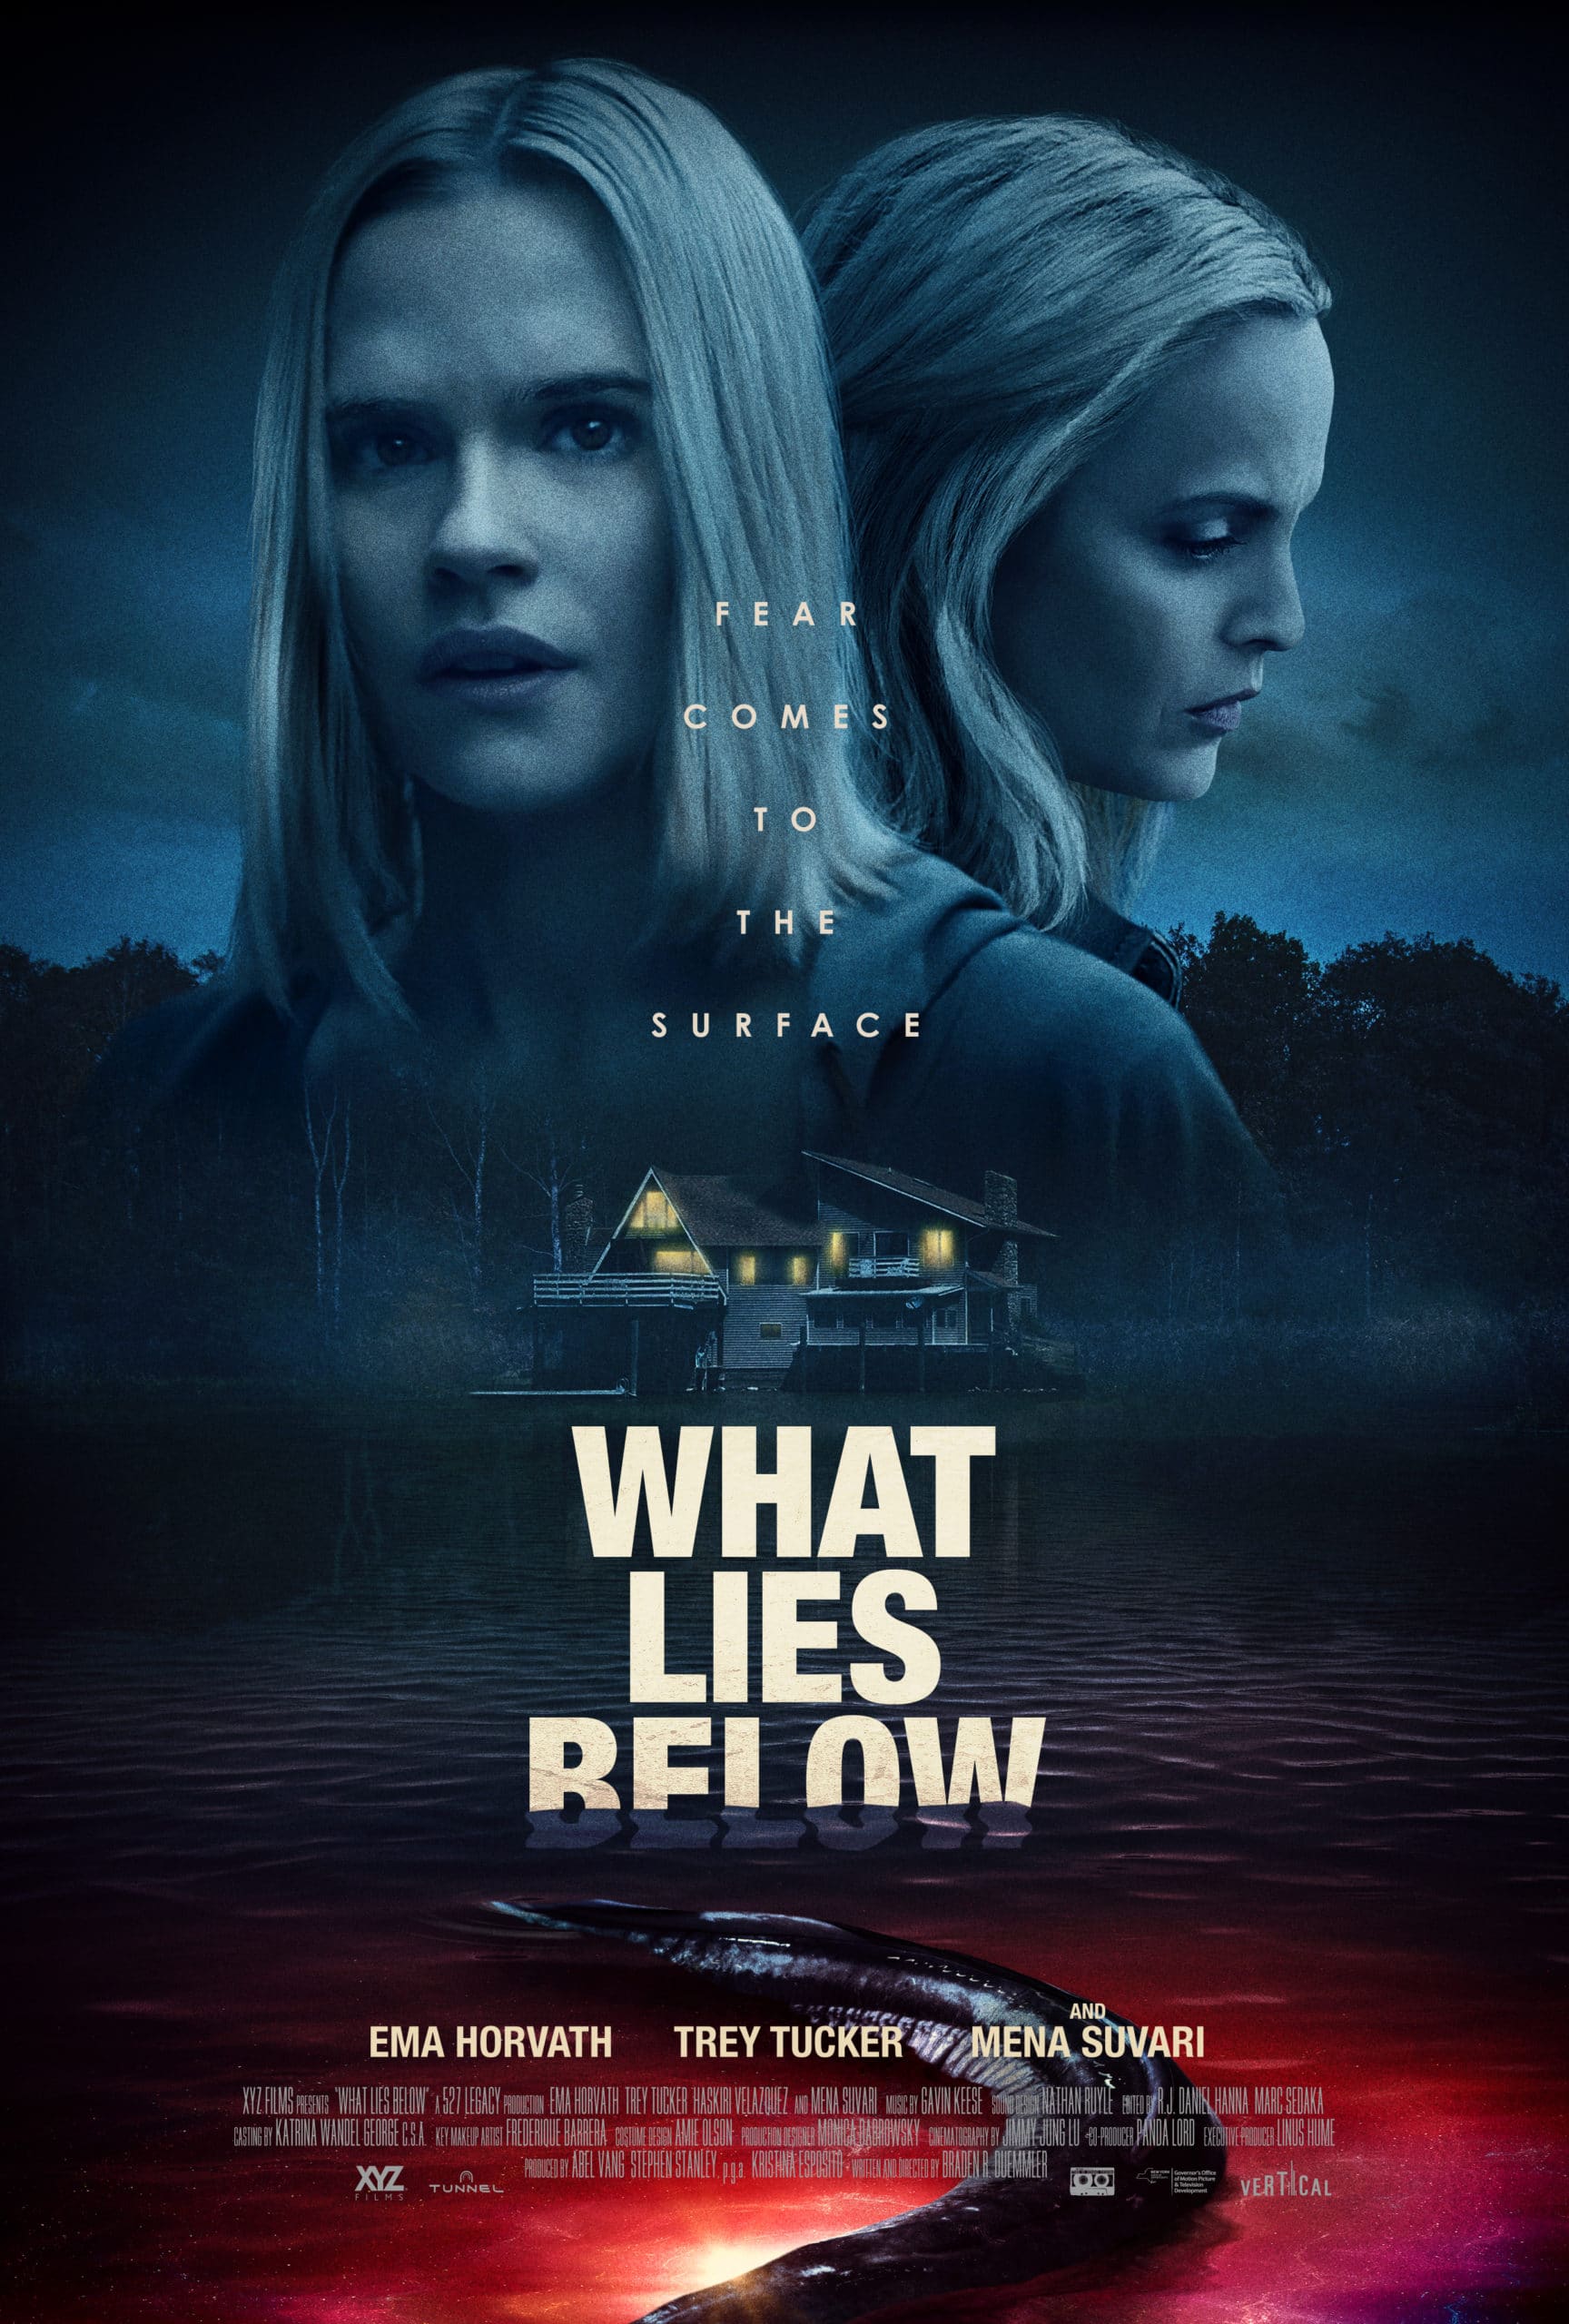 'What Lies Below' Film Poster - Provided by Vertical Entertainment